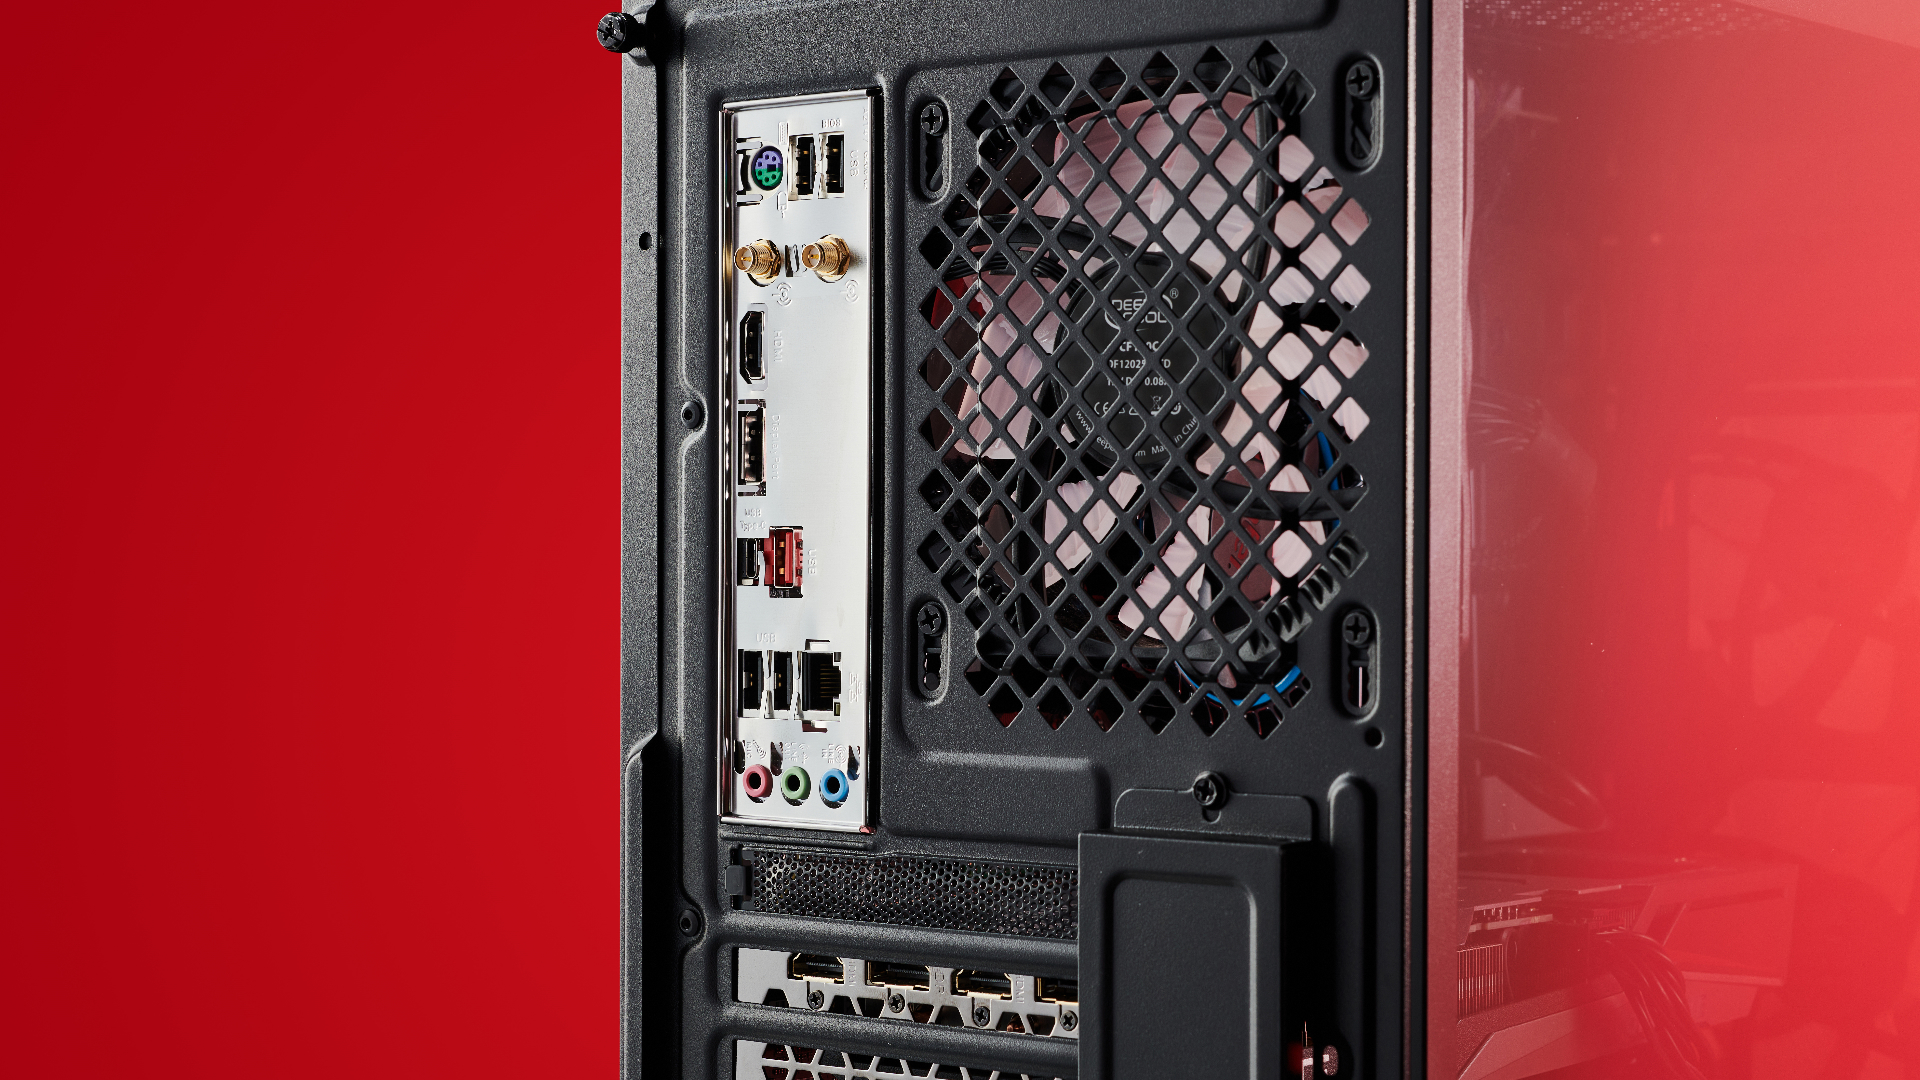 The back ports of the ABS gaming PC are shown in red.